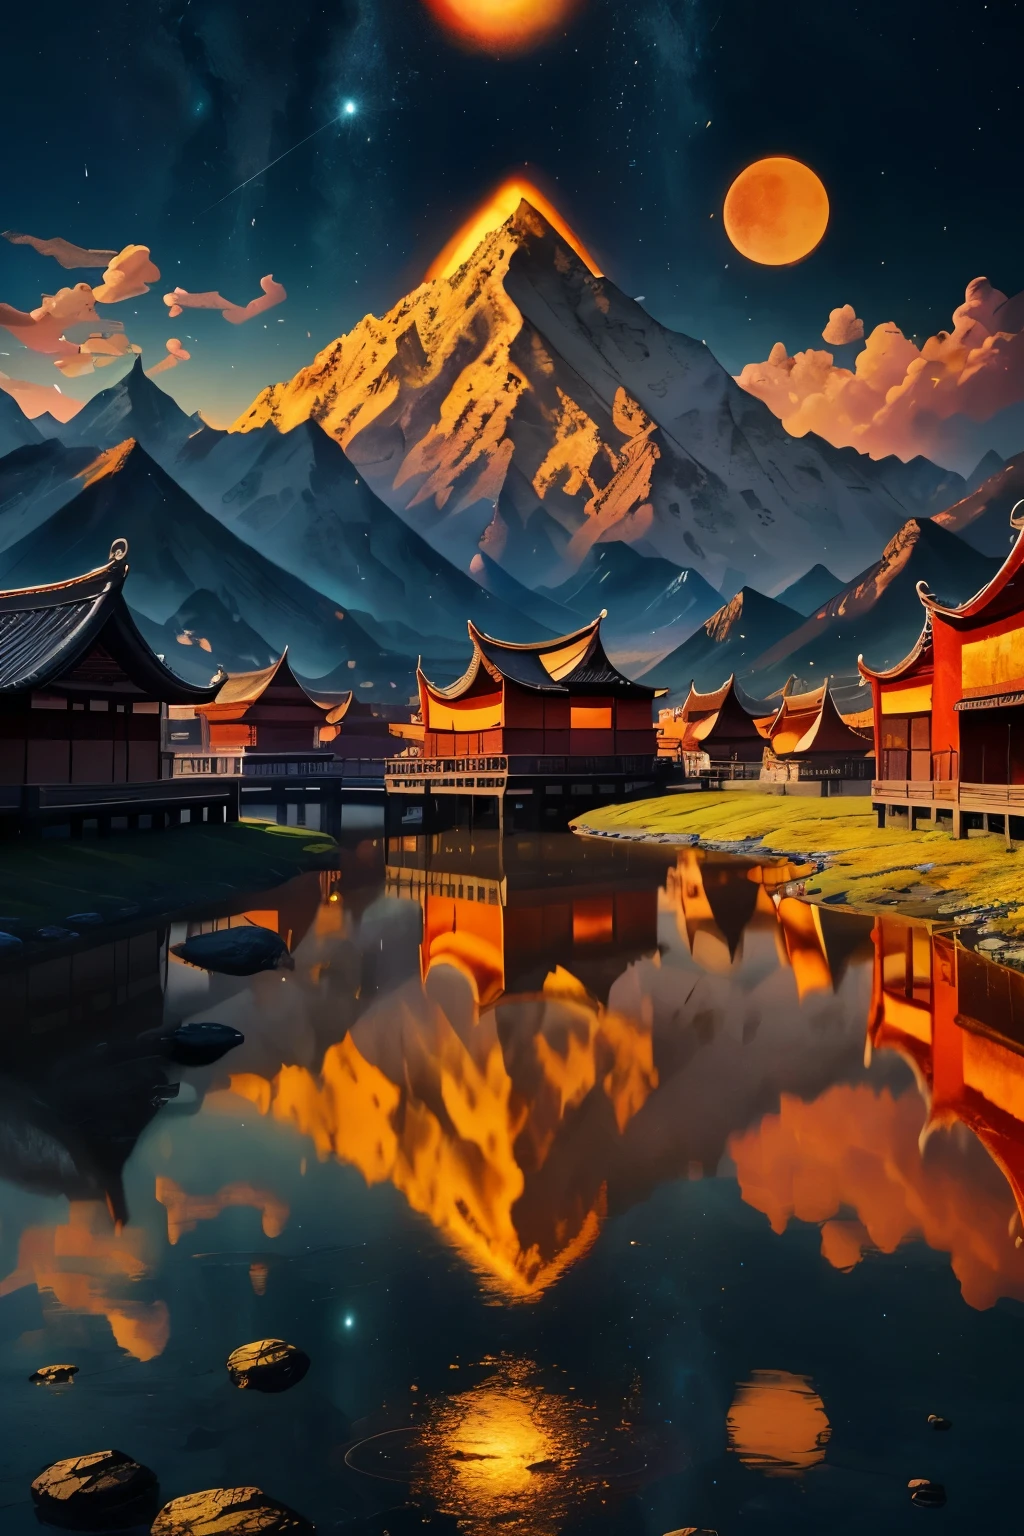 A masterpiece of a surreal scene, with ten golden suns illuminating the sky in radiant, hot hues. The Ultra HD, 32K image is incredibly detailed and realistic, showcasing the vibrant colors of the Chinese ancient village beneath. The clean background allows the intricate mountains and perspiring people to stand out, while children, drawn in the Pixar style, add a whimsical touch to this stunning wallpaper.